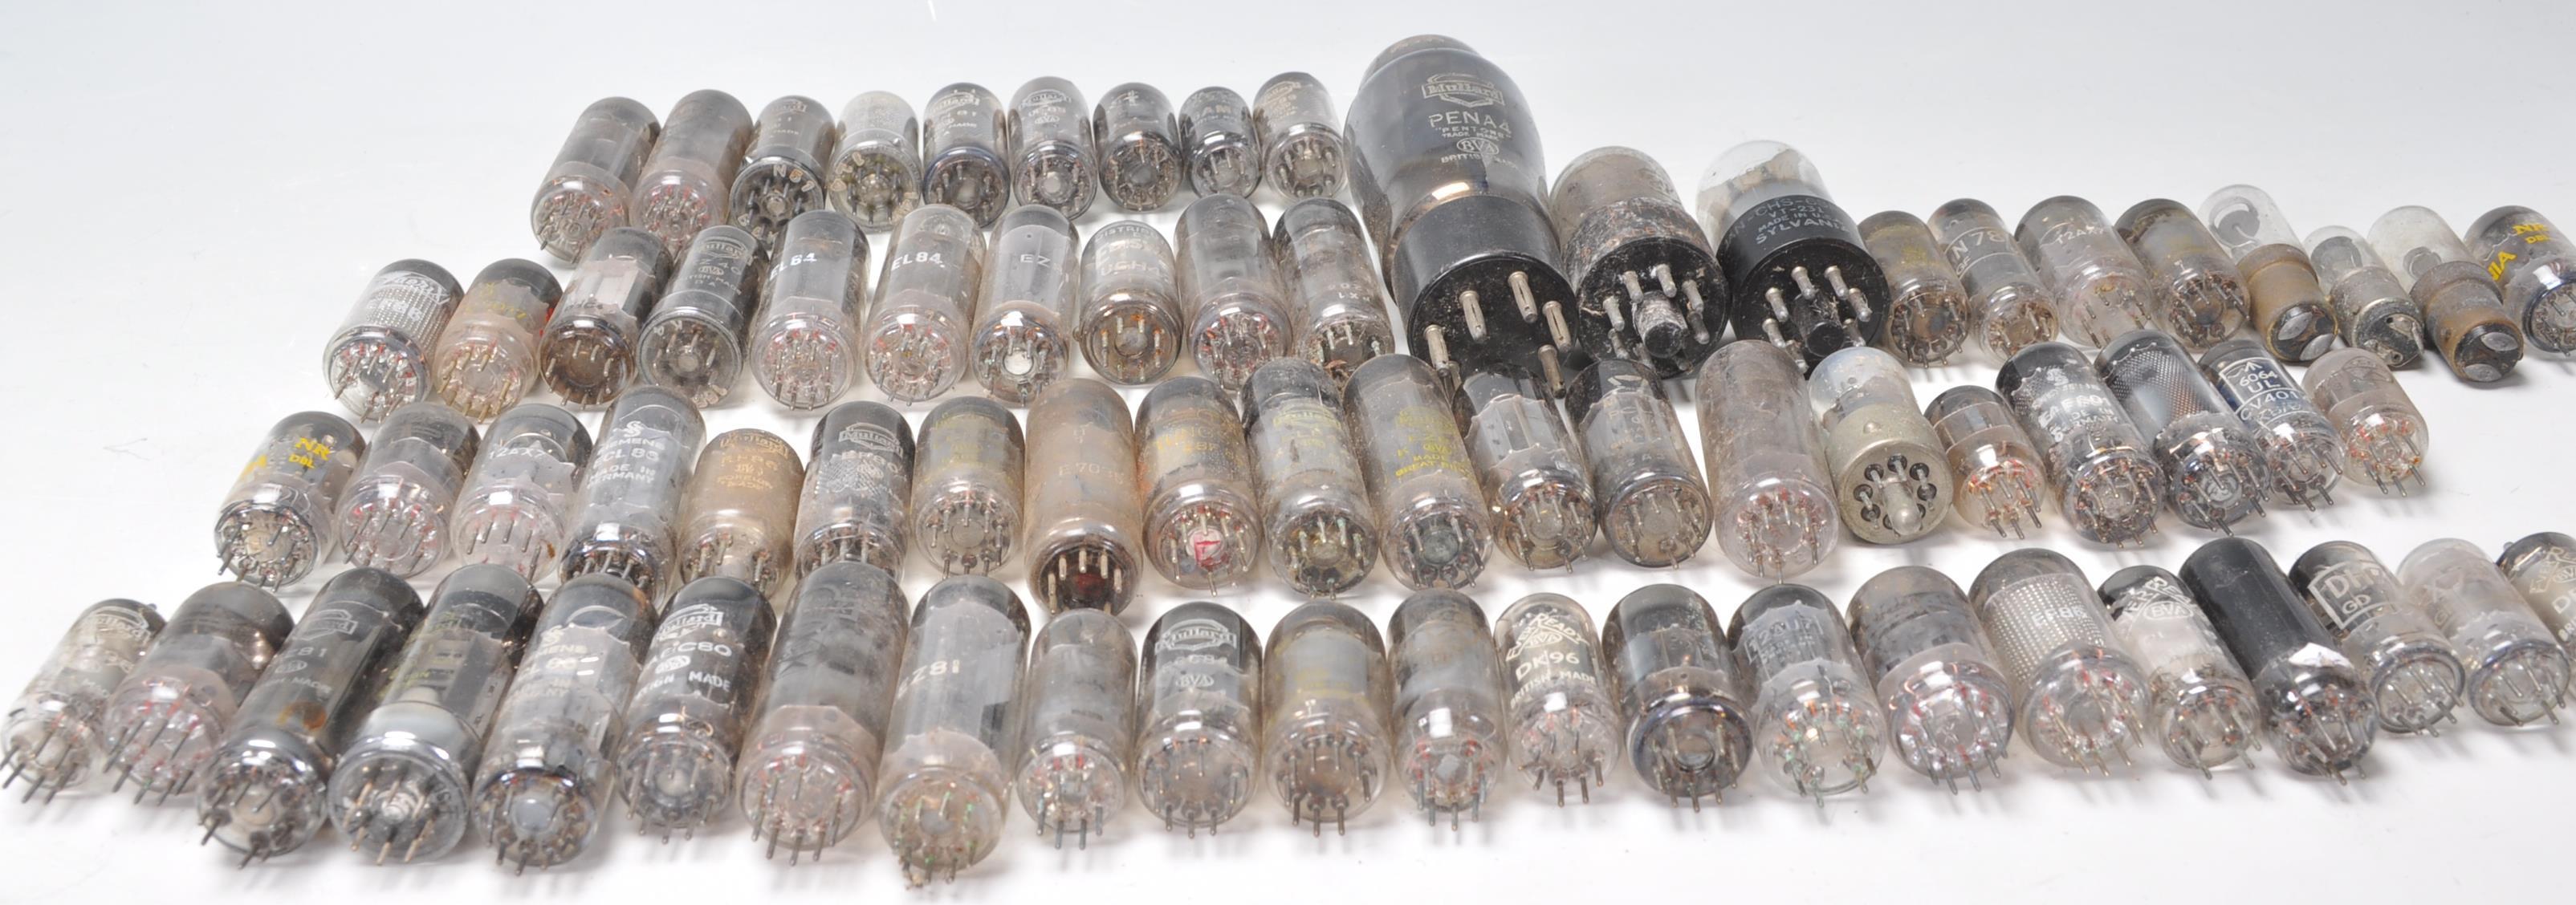 A collection of vintage mixed radio valves to include EC83, EZ81, Ediswate UCH42, Mullard EZ81 - Image 19 of 21